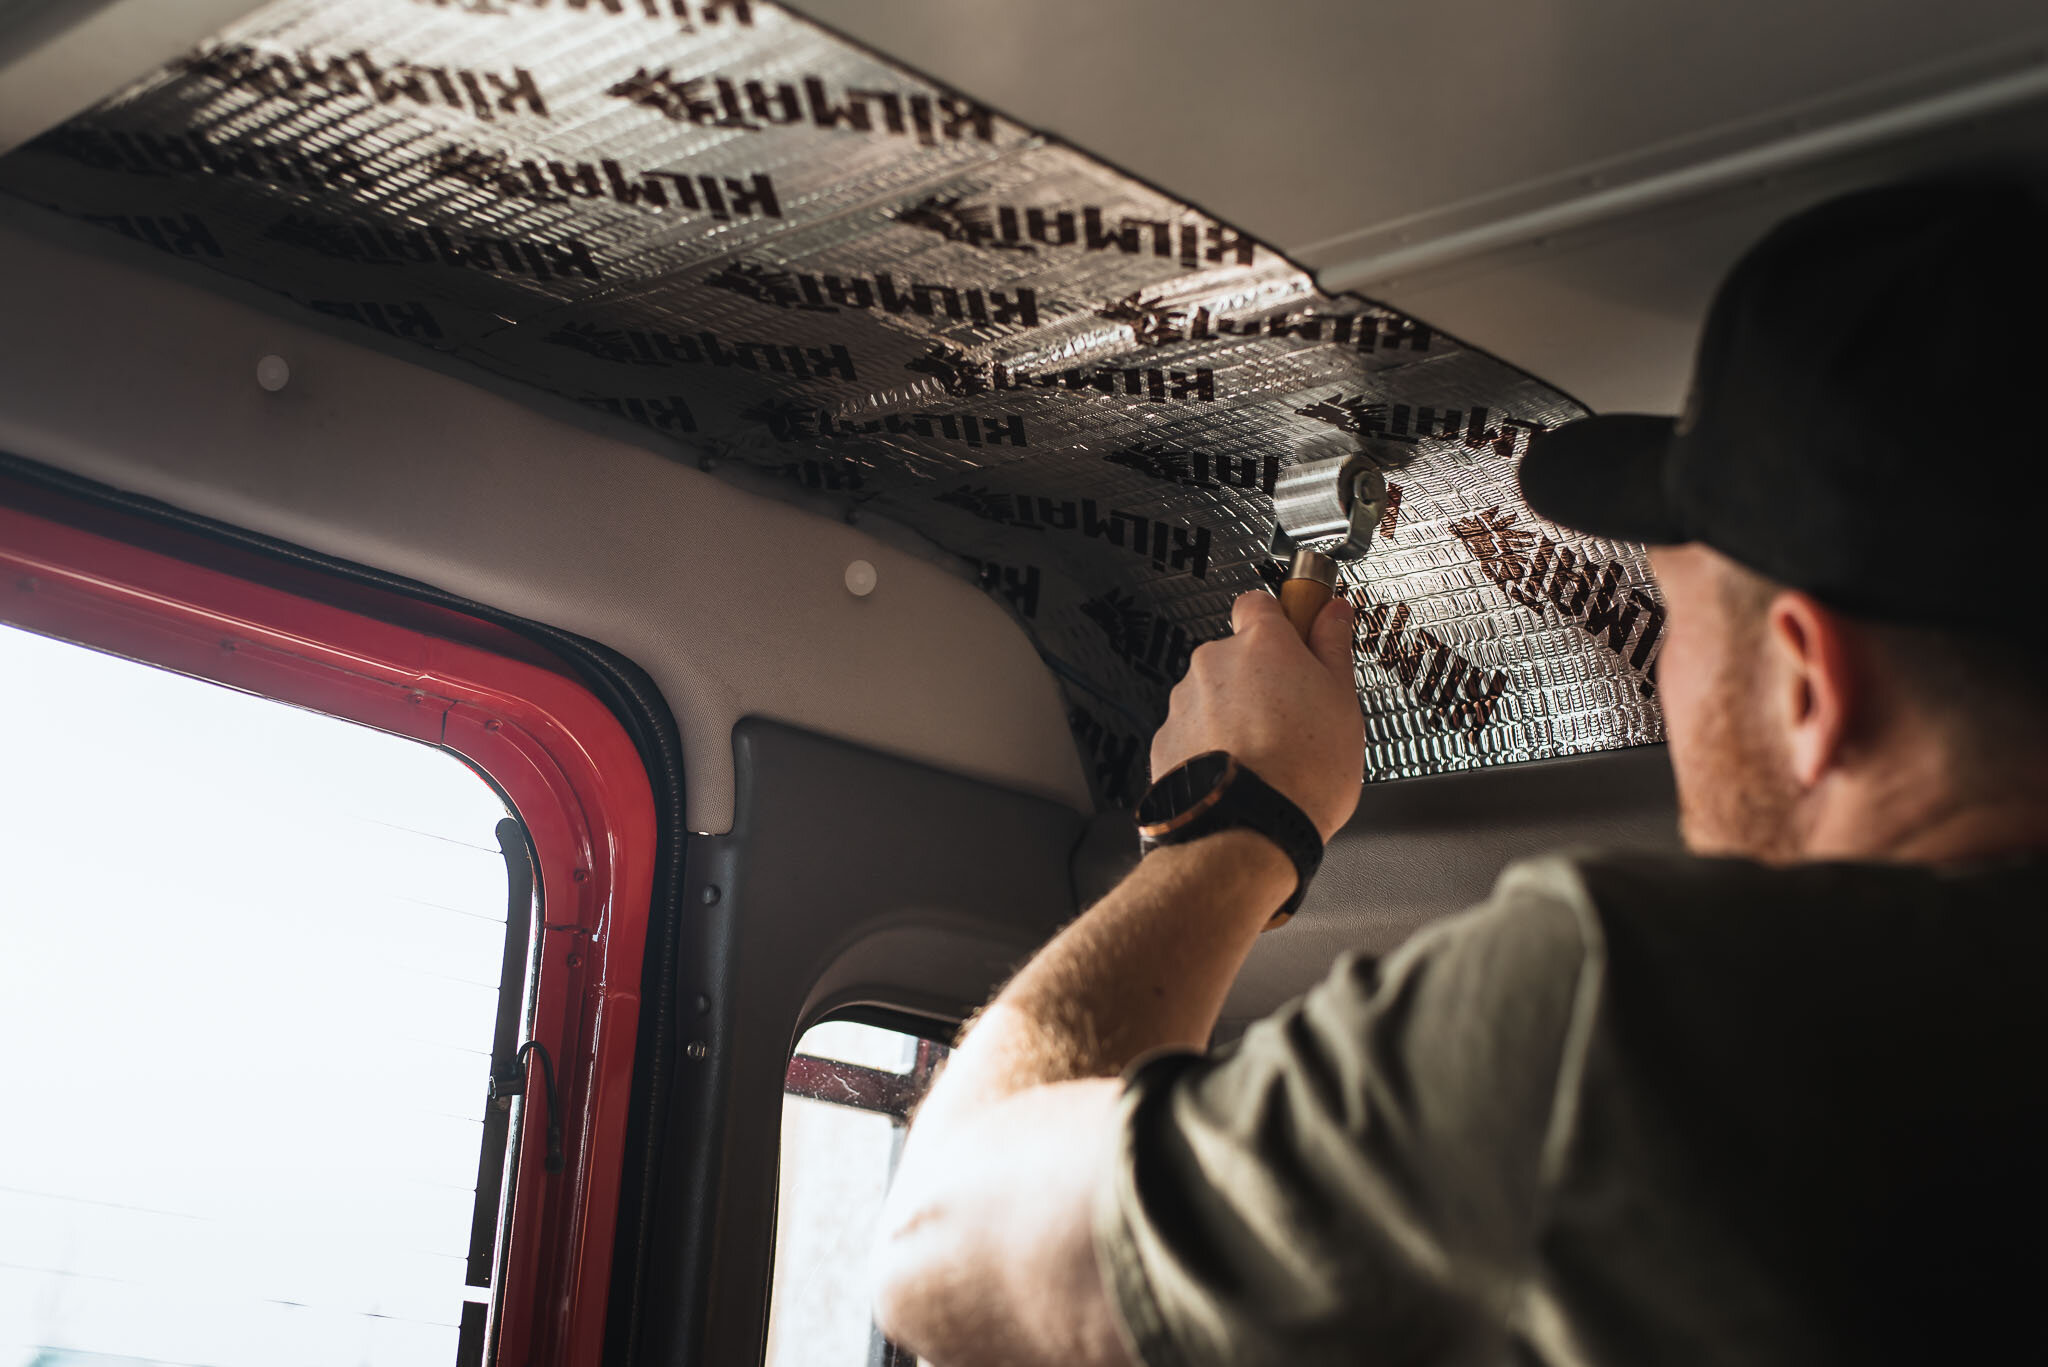 Installing Kilmat Soundproofing in the Cab